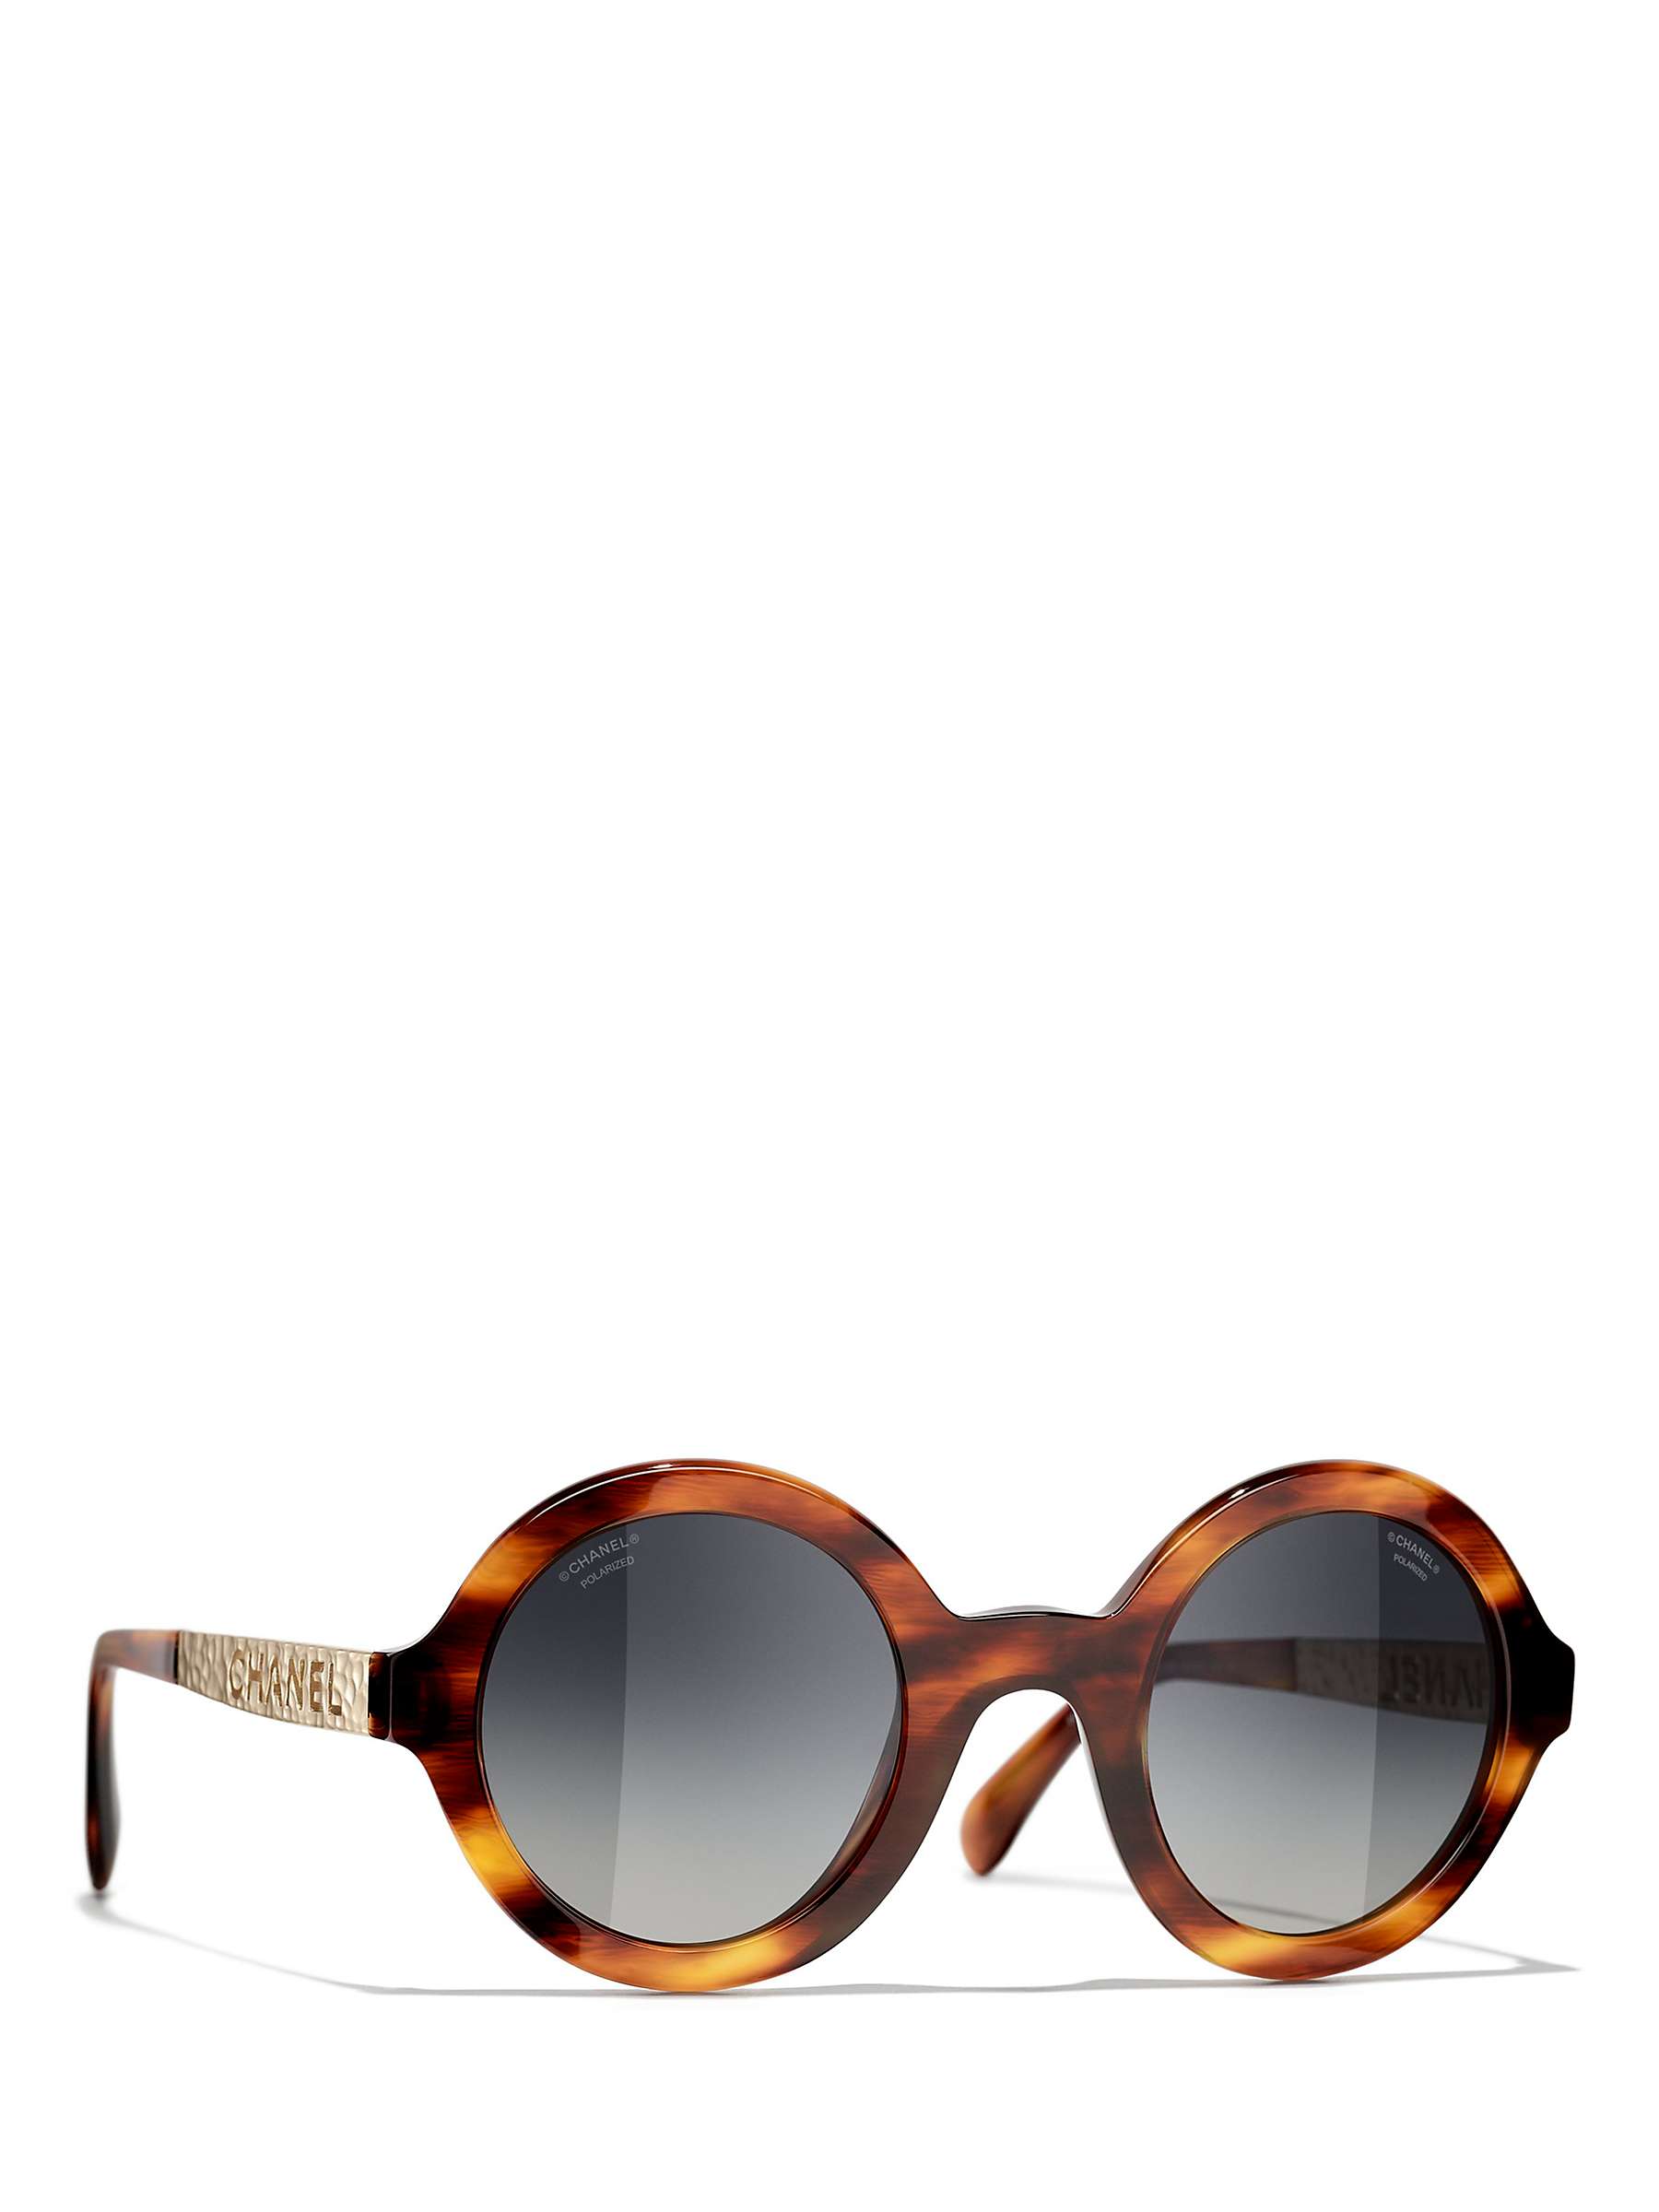 Buy CHANEL Round Sunglasses CH5441 Striped Brown/Grey Gradient Online at johnlewis.com